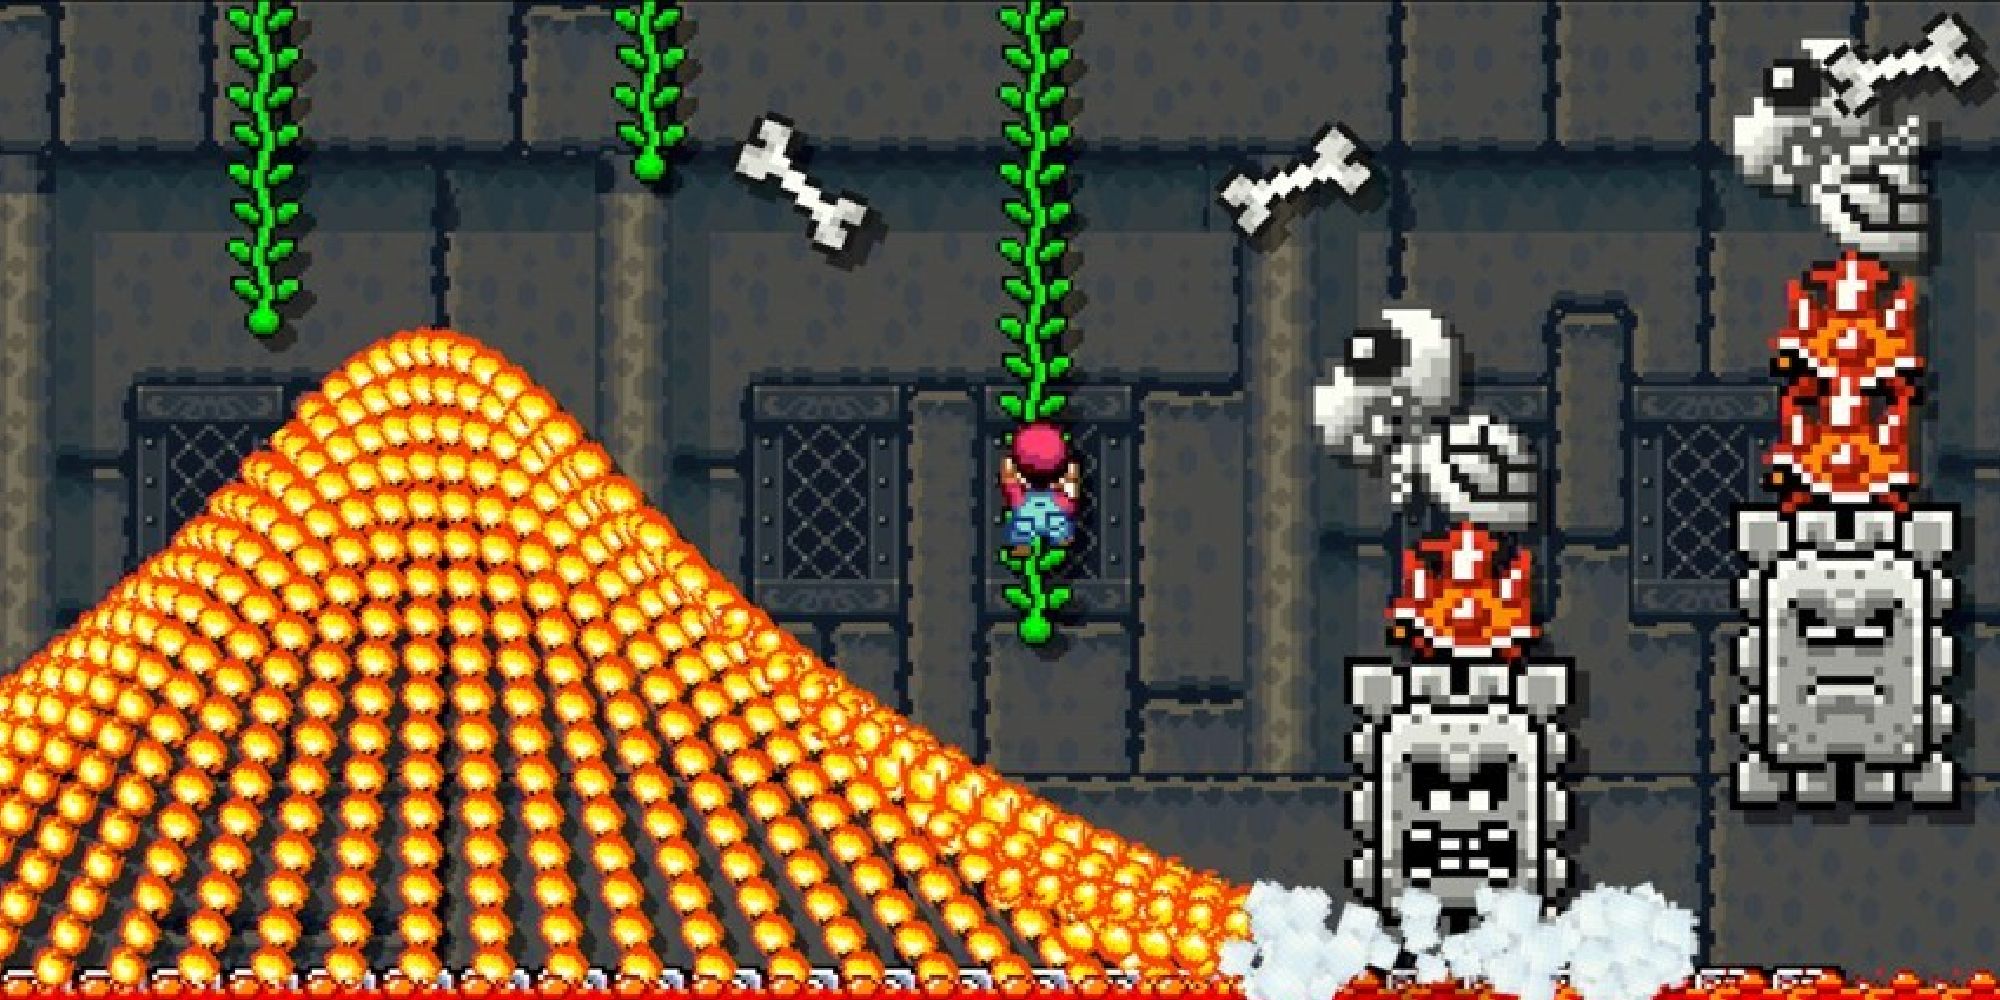 An impossible Super Mario World level with lava bars and Thwomps from Super Mario Maker